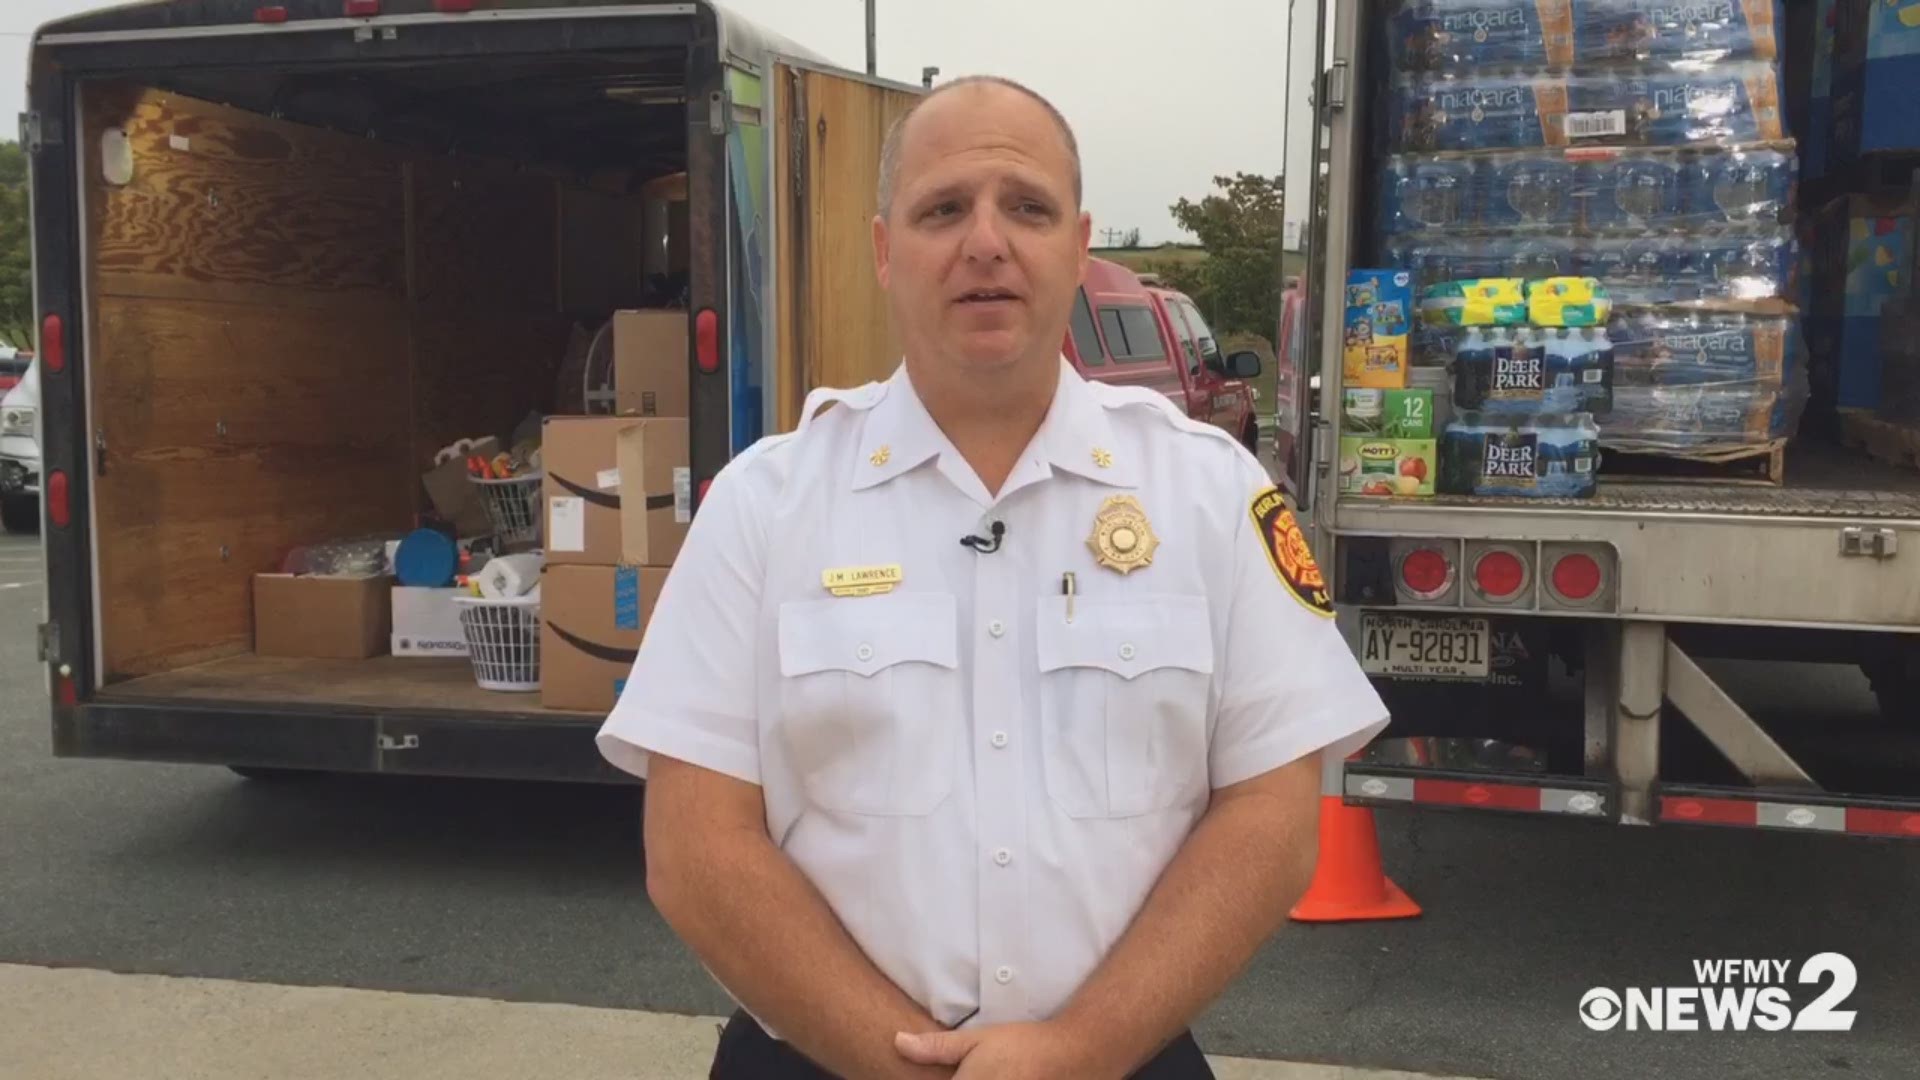 The community pitched in after the Burlington Fire Department asked for donations to help those hurt by Hurricane Florence.